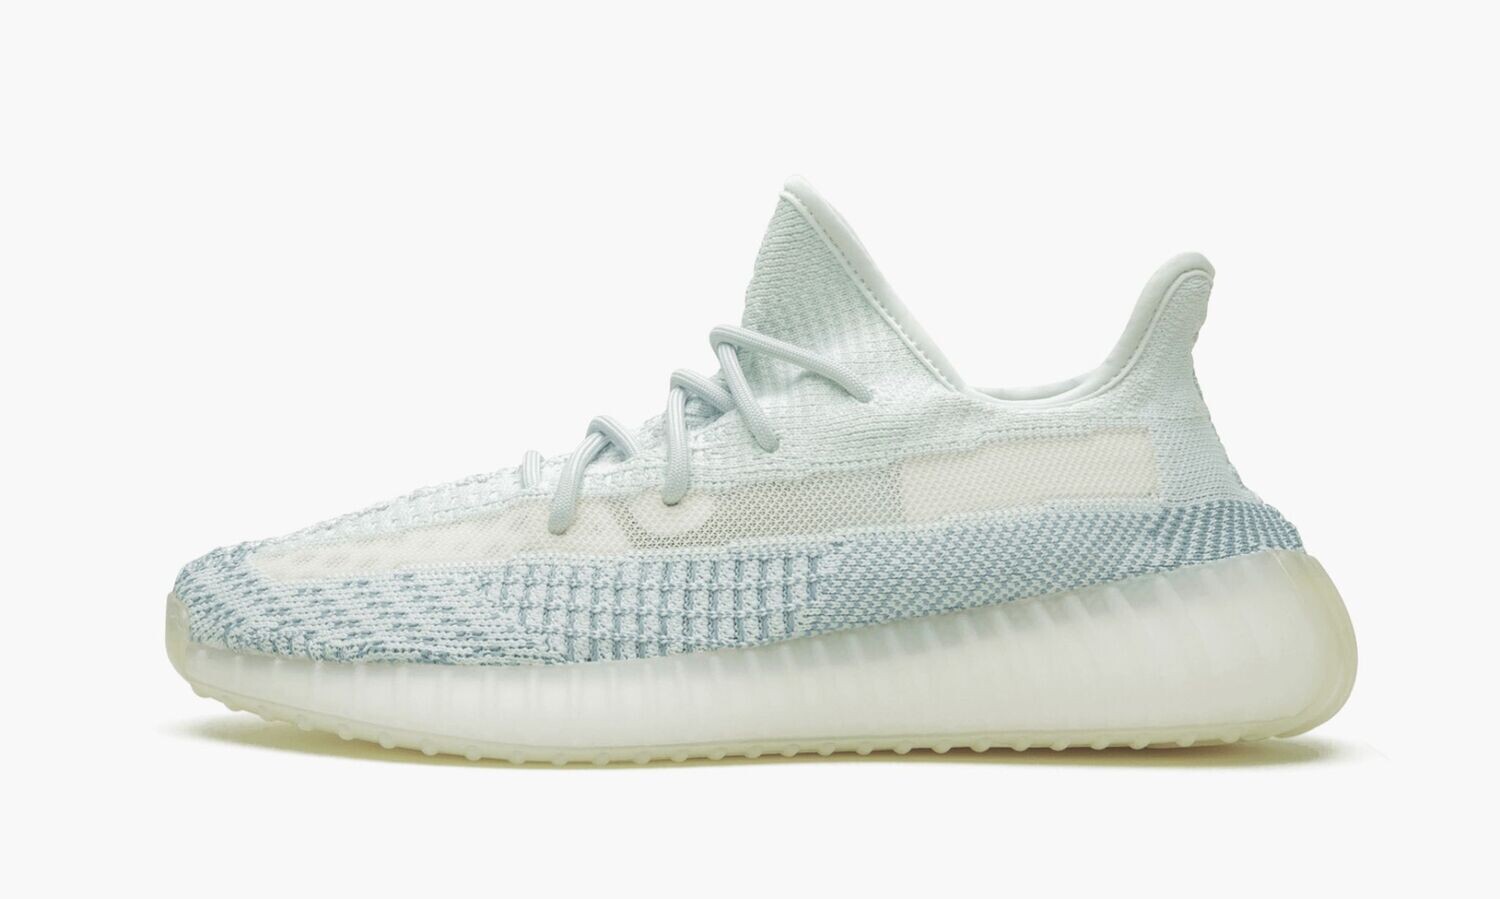 ADIDAS YEEZY
YEEZY BOOST 350 V2 REFLECTIVE
&quot;Cloud White&quot;